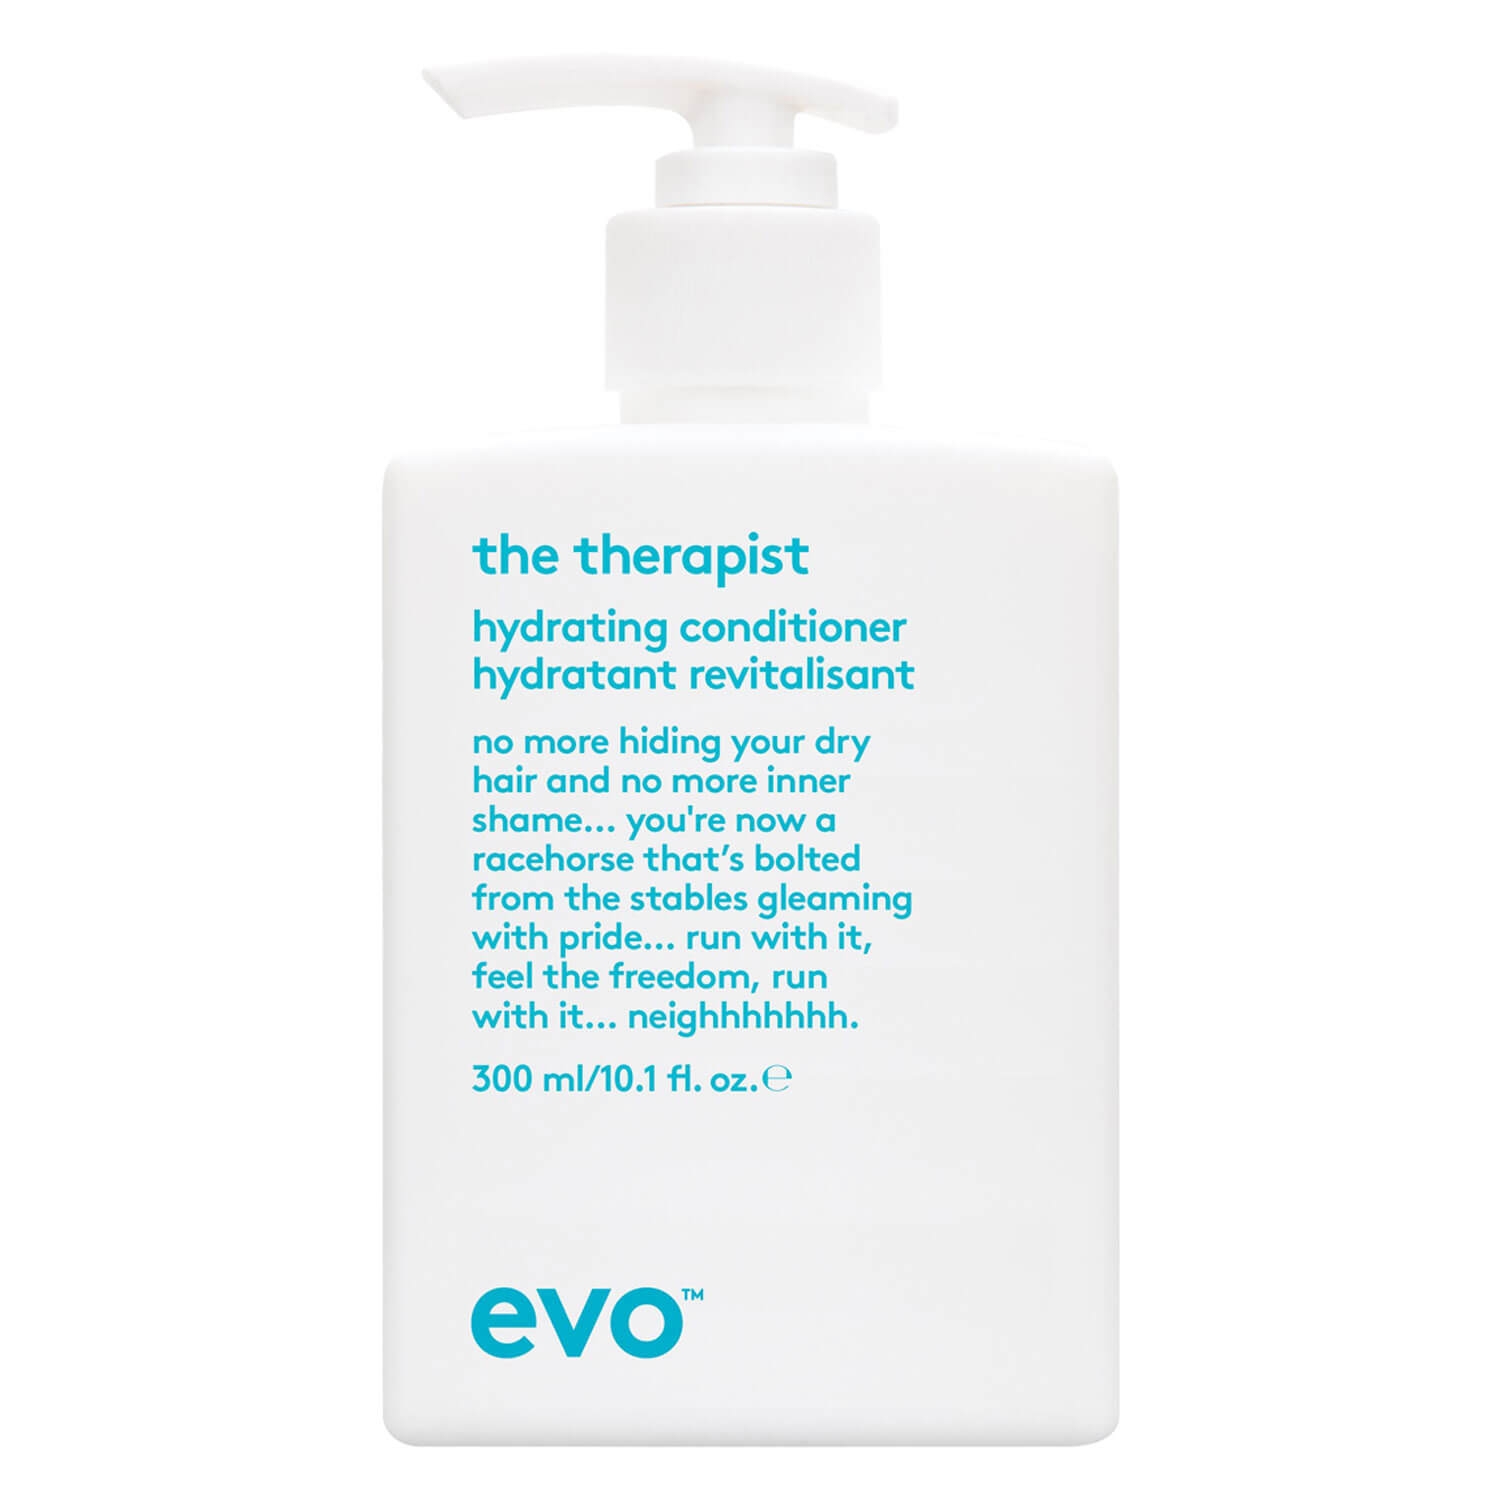 Product image from evo calm - the therapist hydrating conditioner